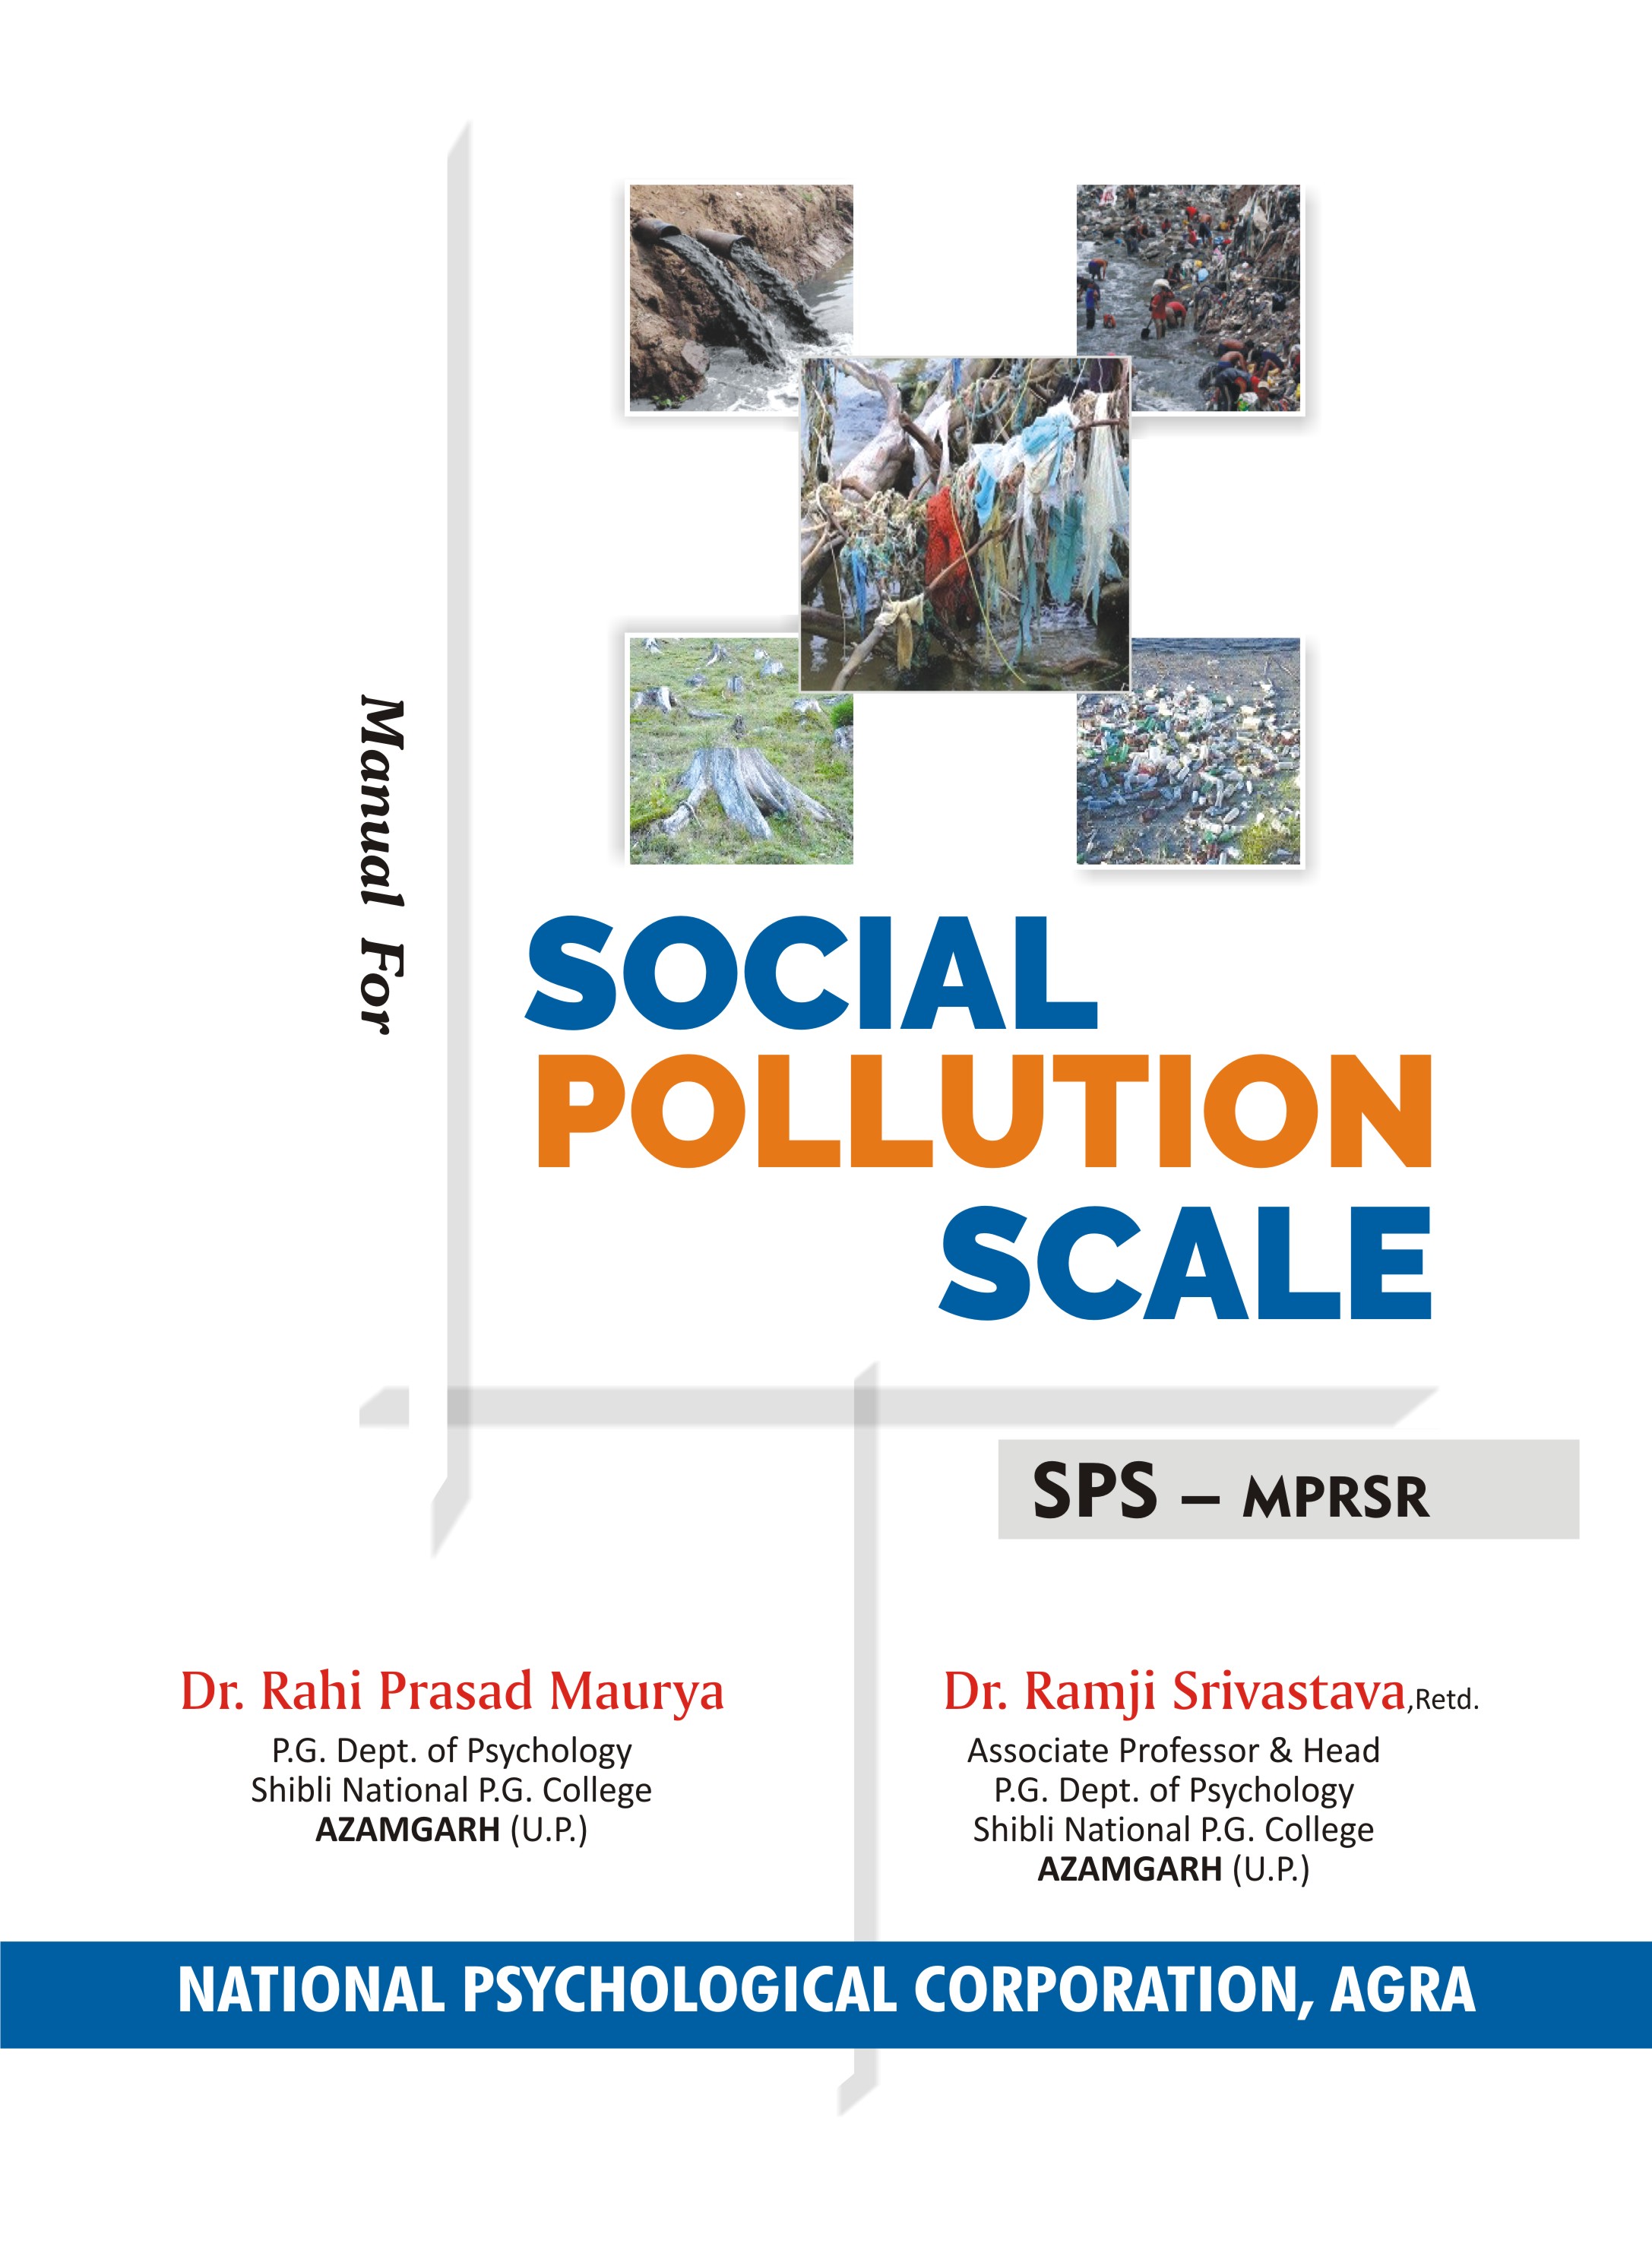 SOCIAL-POLLUTION-SCALE